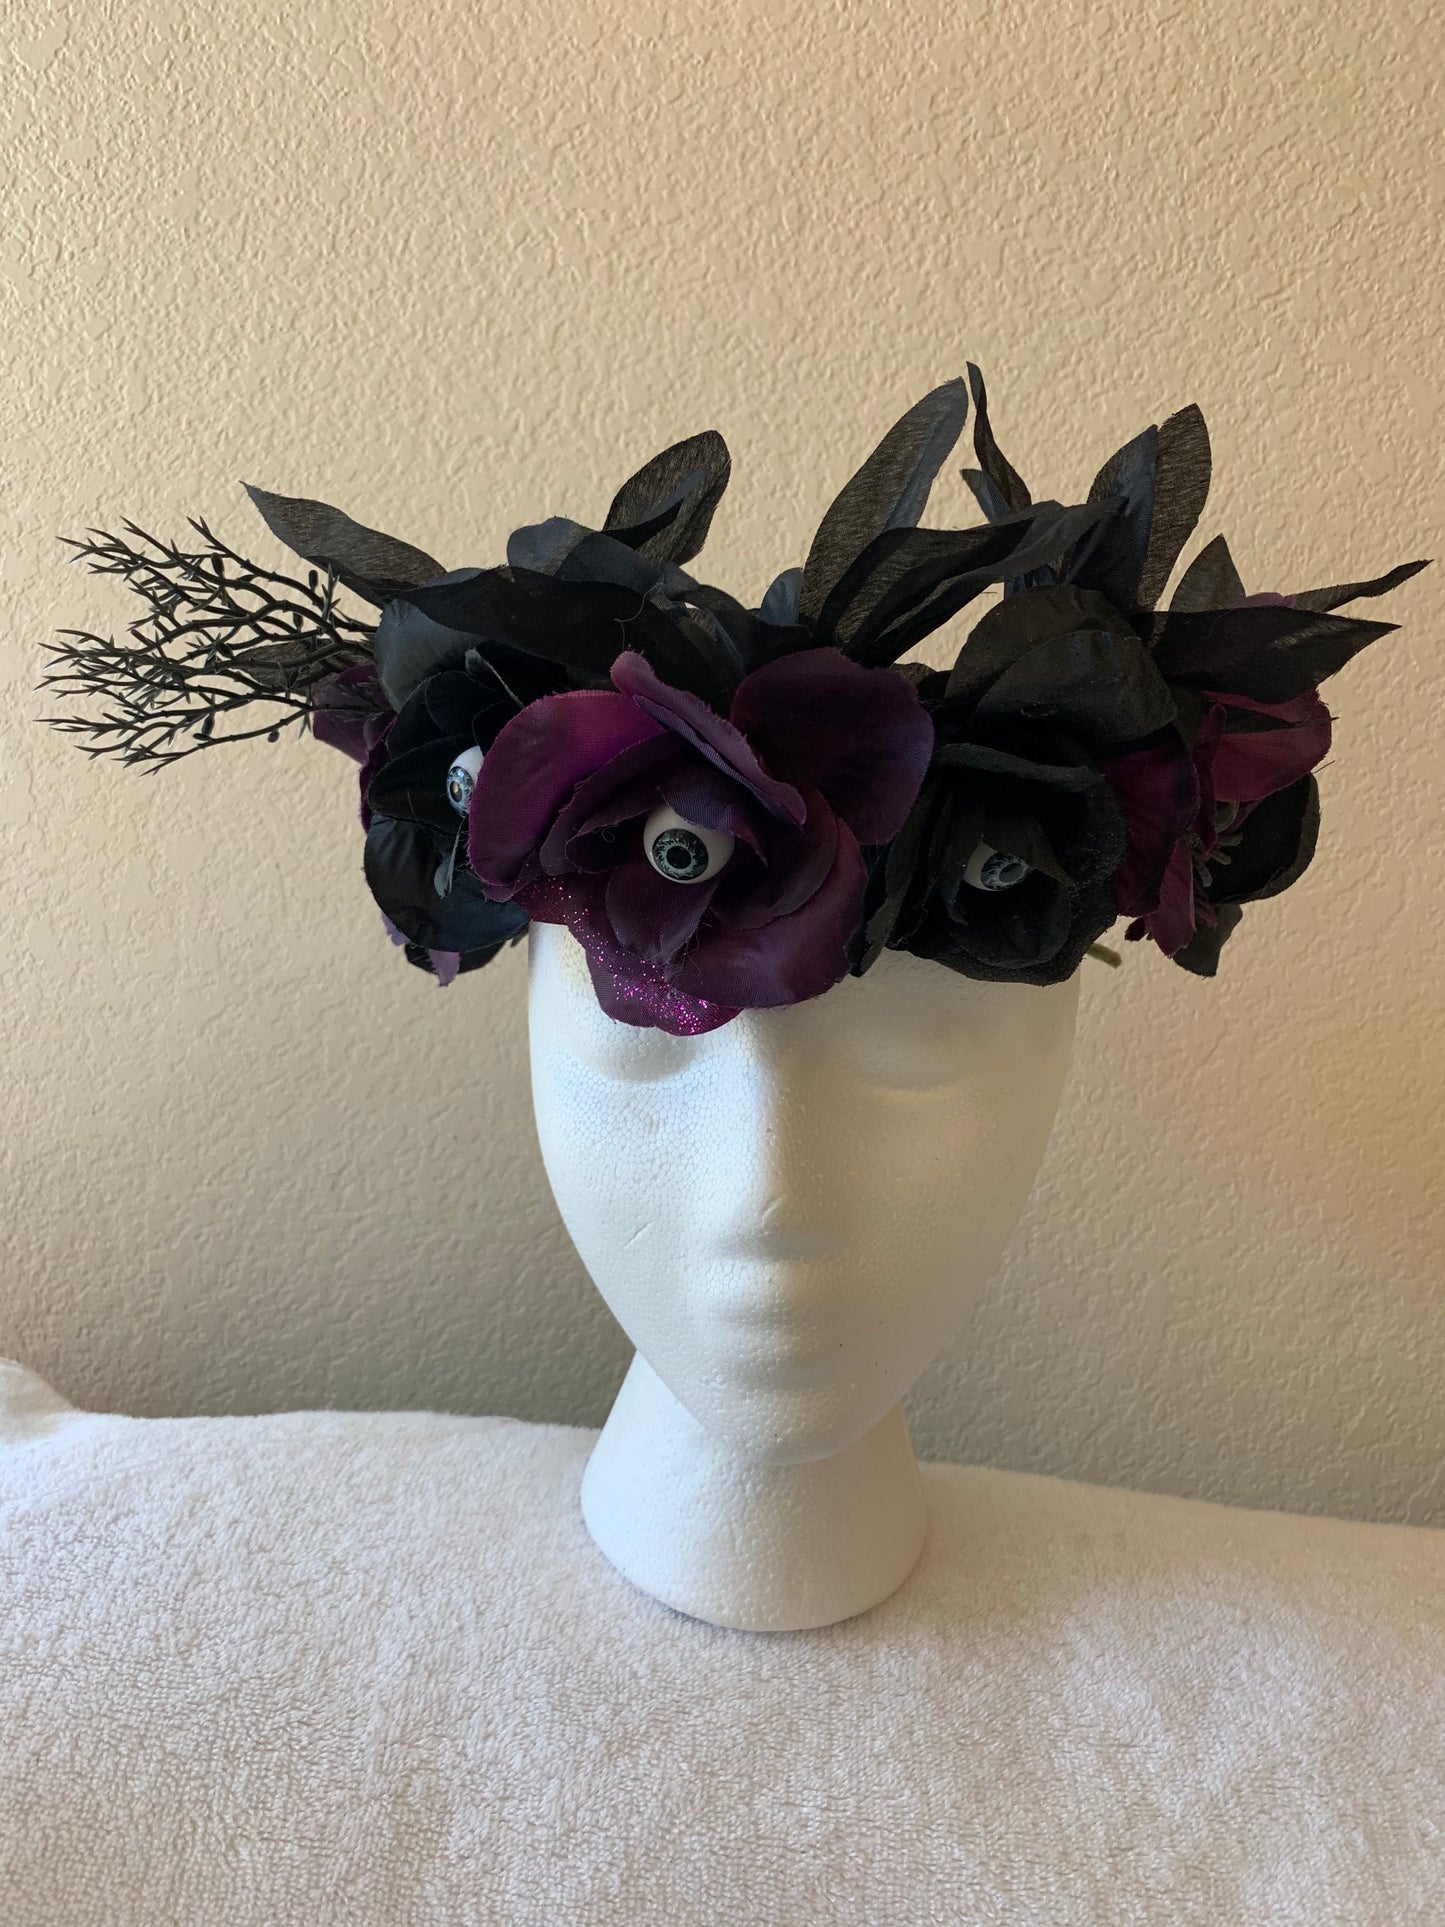 Large Wreath- Black and Purple with Eyes Flowers